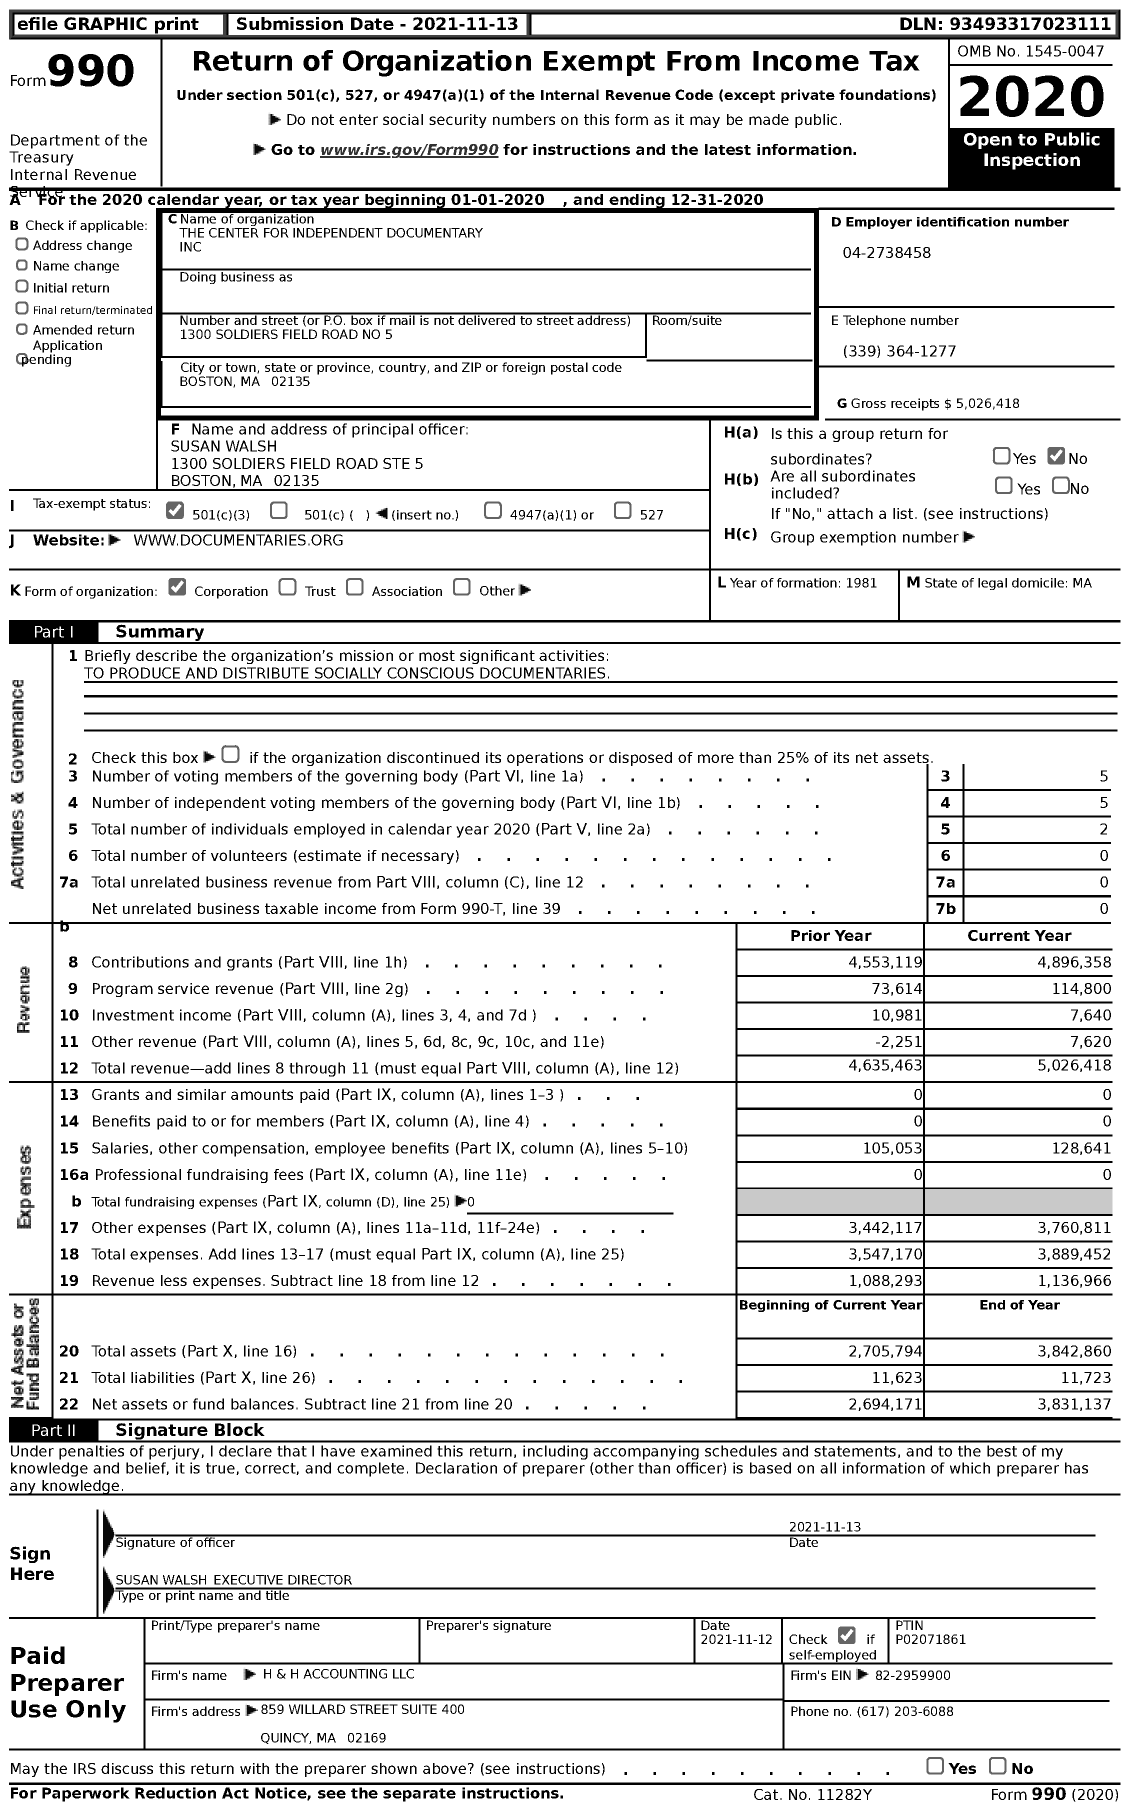 Image of first page of 2020 Form 990 for Center for Independent Documentary (CID)